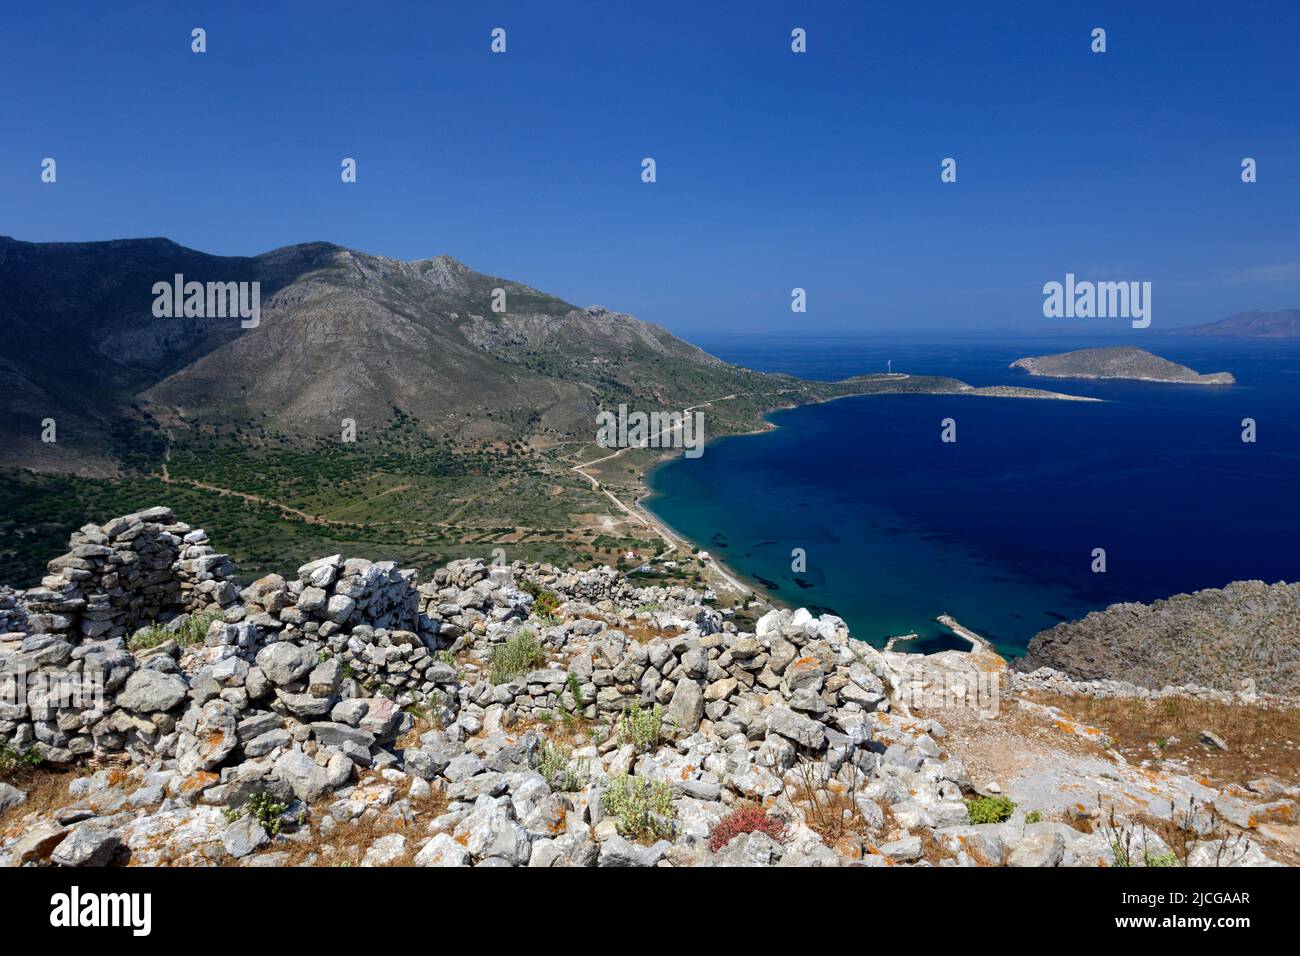 View of Aghios Antonios Bay from the Ancient settlement on hill above Megalo Chorio,  Tilos, Dodecanese islands, Southern Aegean, Greece. Stock Photo